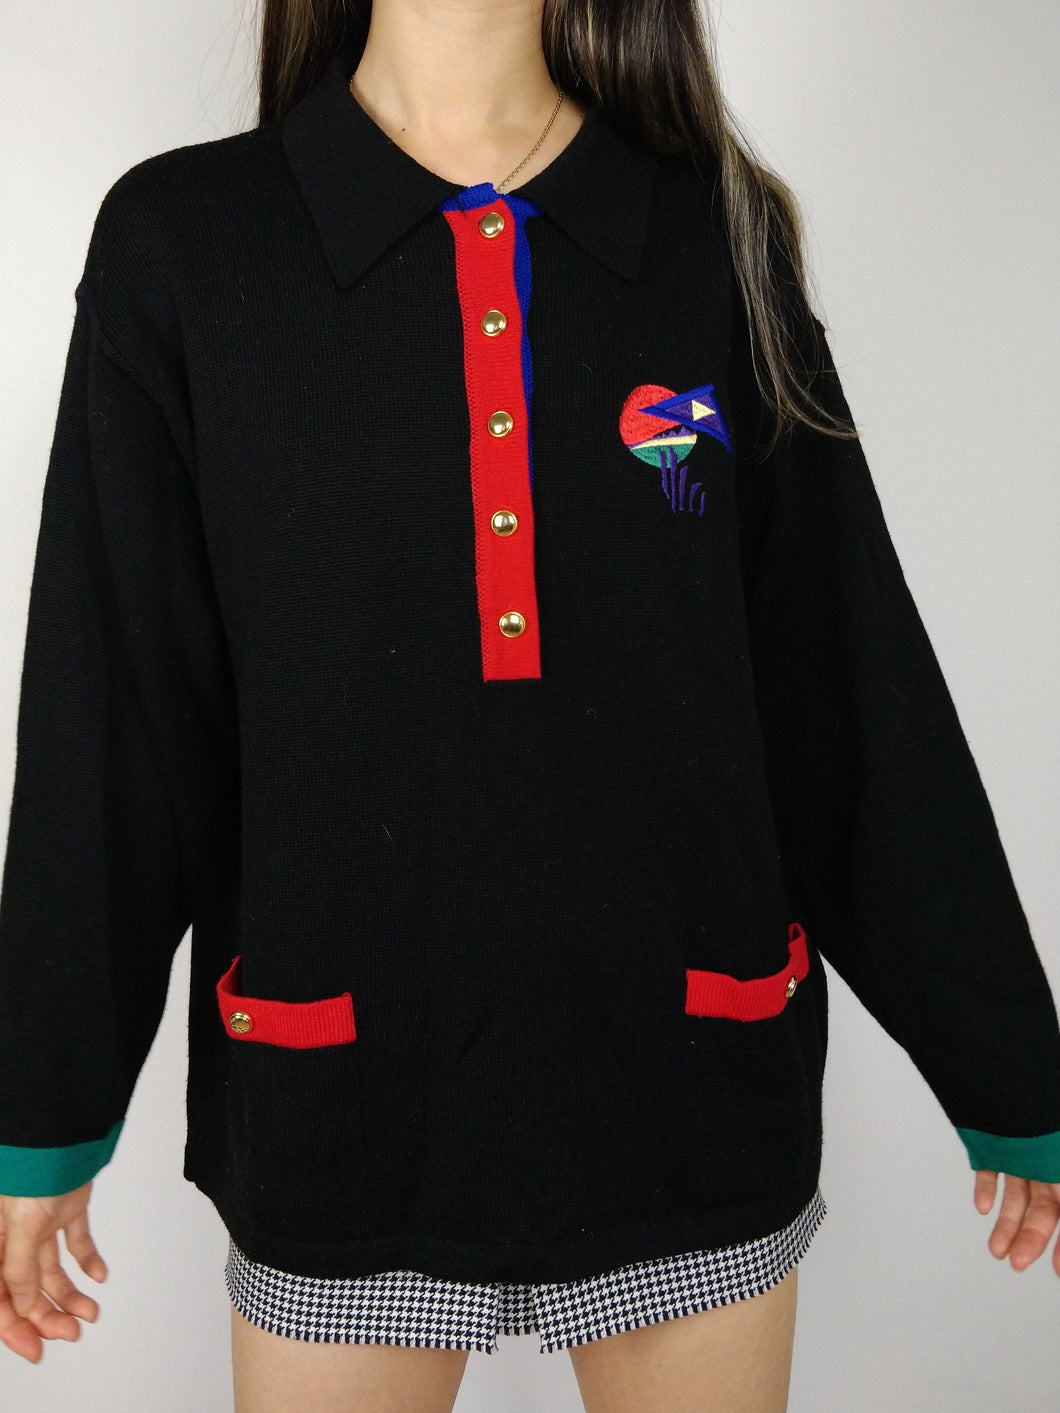 The Black 80s Knit | Vintage wool mix knit sweater embroidery black red blue green polo collar M